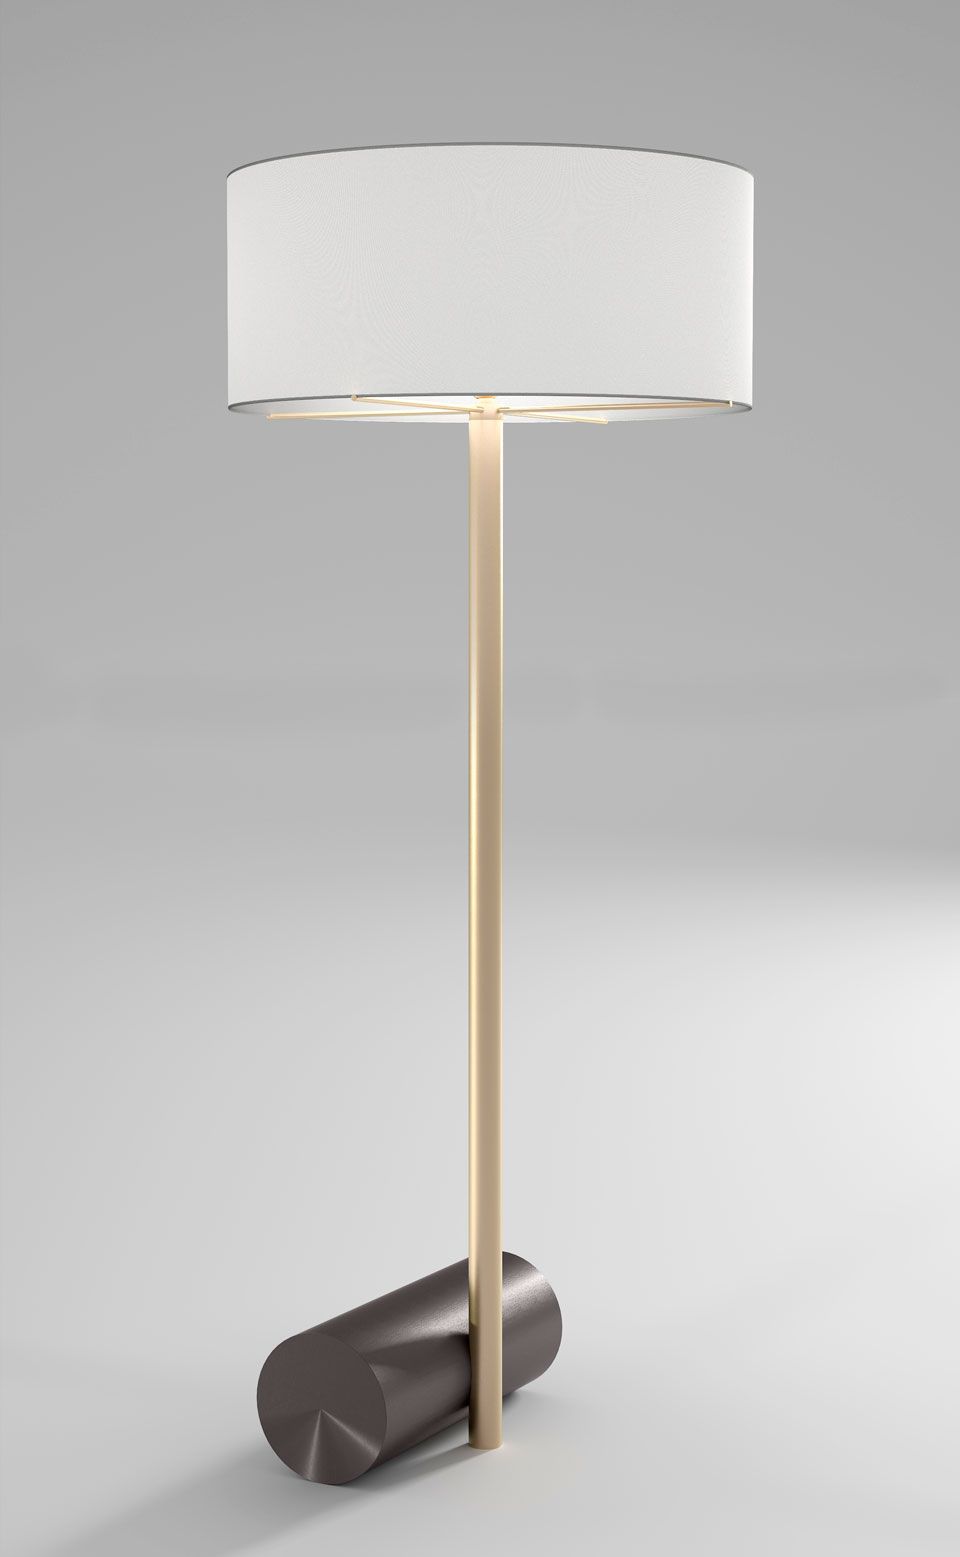 Calée Xl Large Floor Lamp, Cylindrical Base, Satin Brass And Graphite Cvl  Luminaires – Contemporary Lighting, Made In France, Massive Brass – Réf (View 13 of 20)